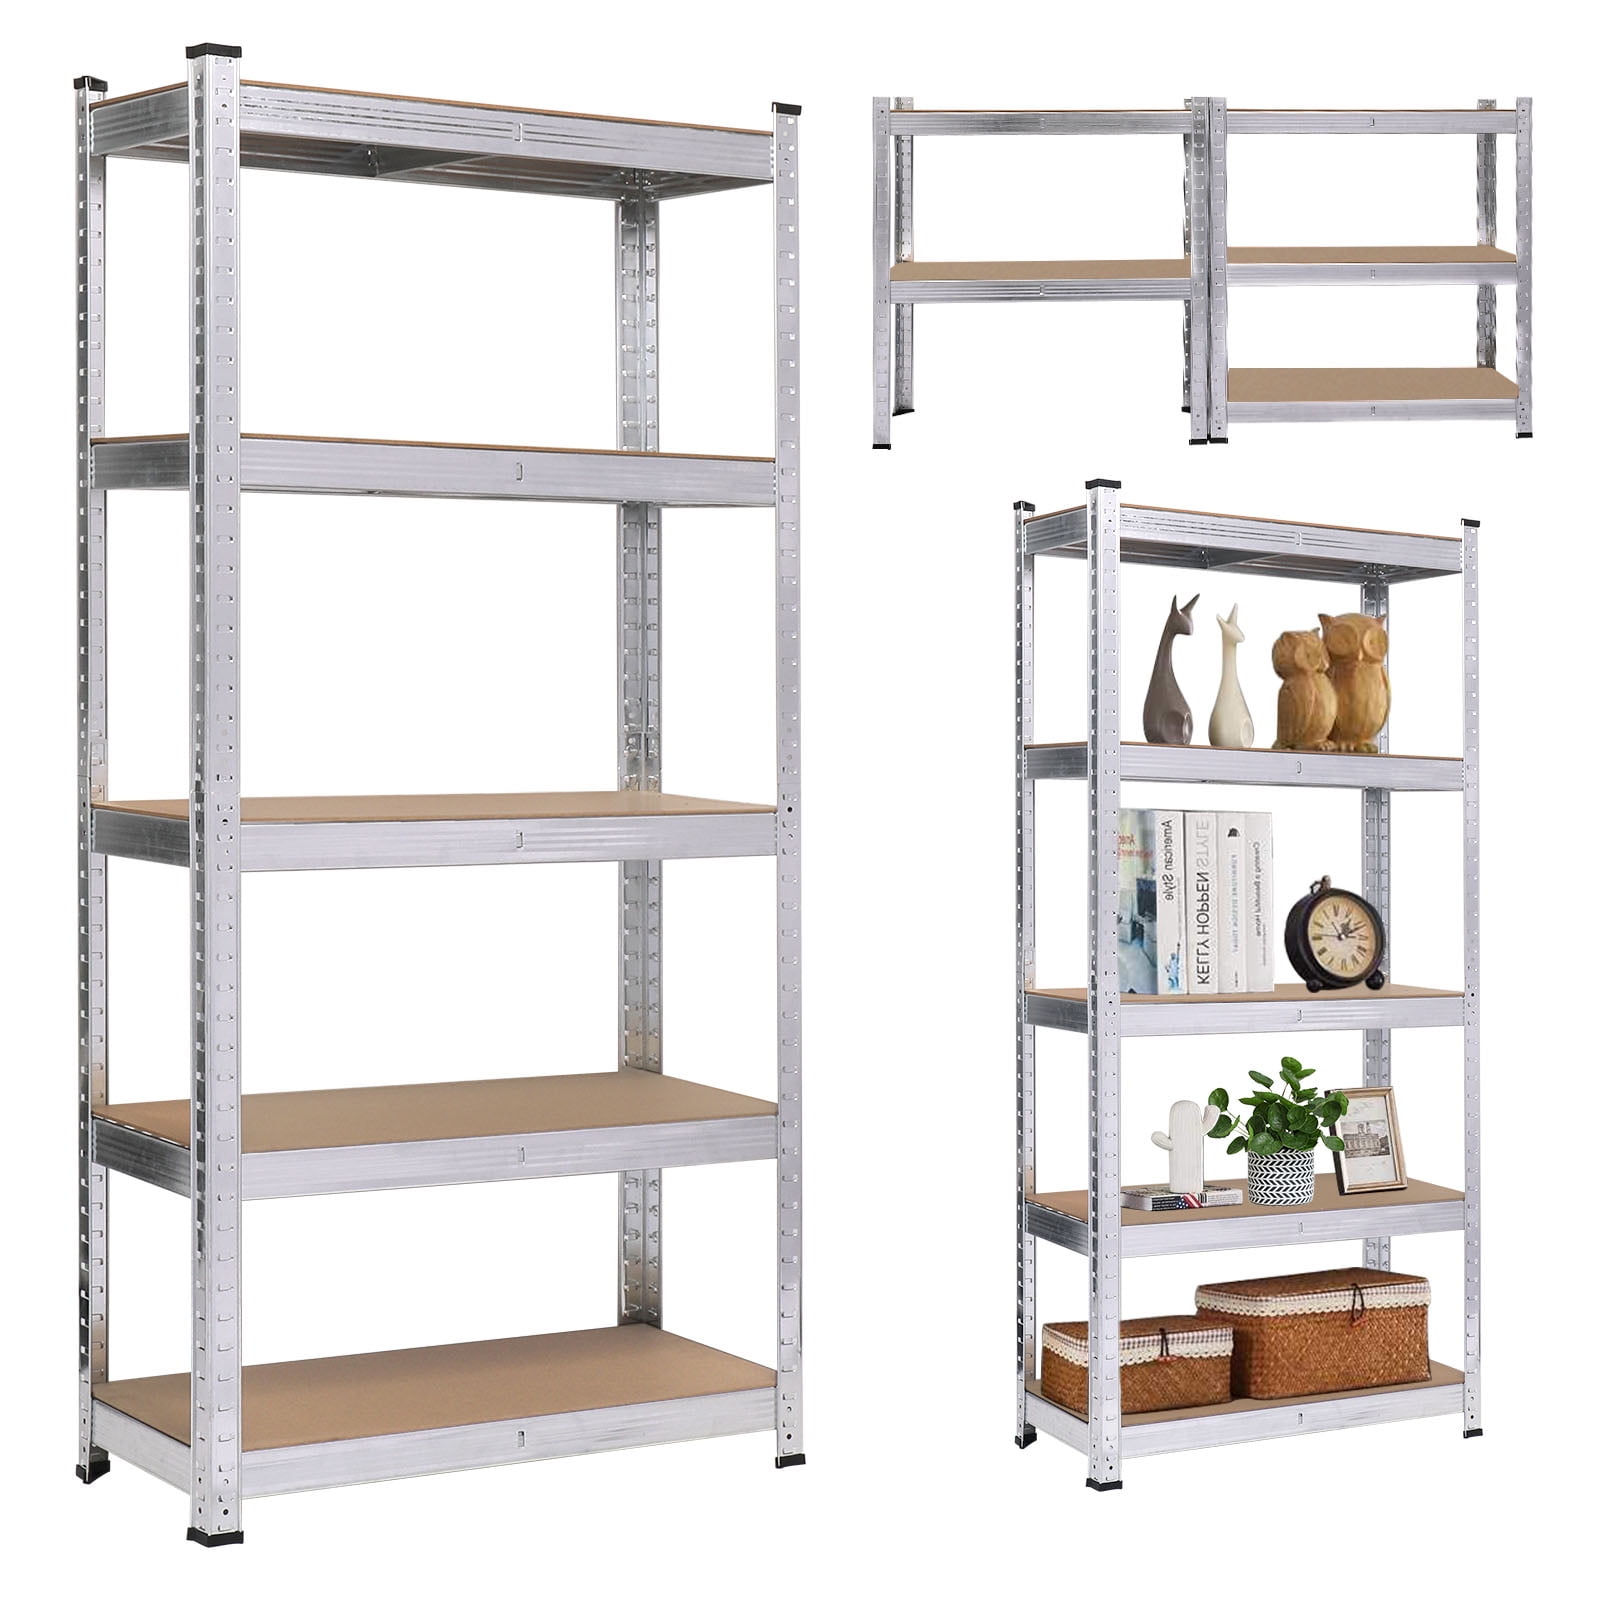 Dropship Storage Shelves 5 Tier Heavy Duty Metal Shelving Unit Adjustable  Shelving Units And Storage Rack Kitchen Garage Shelf H72 * W47.2 * D23.6 to  Sell Online at a Lower Price